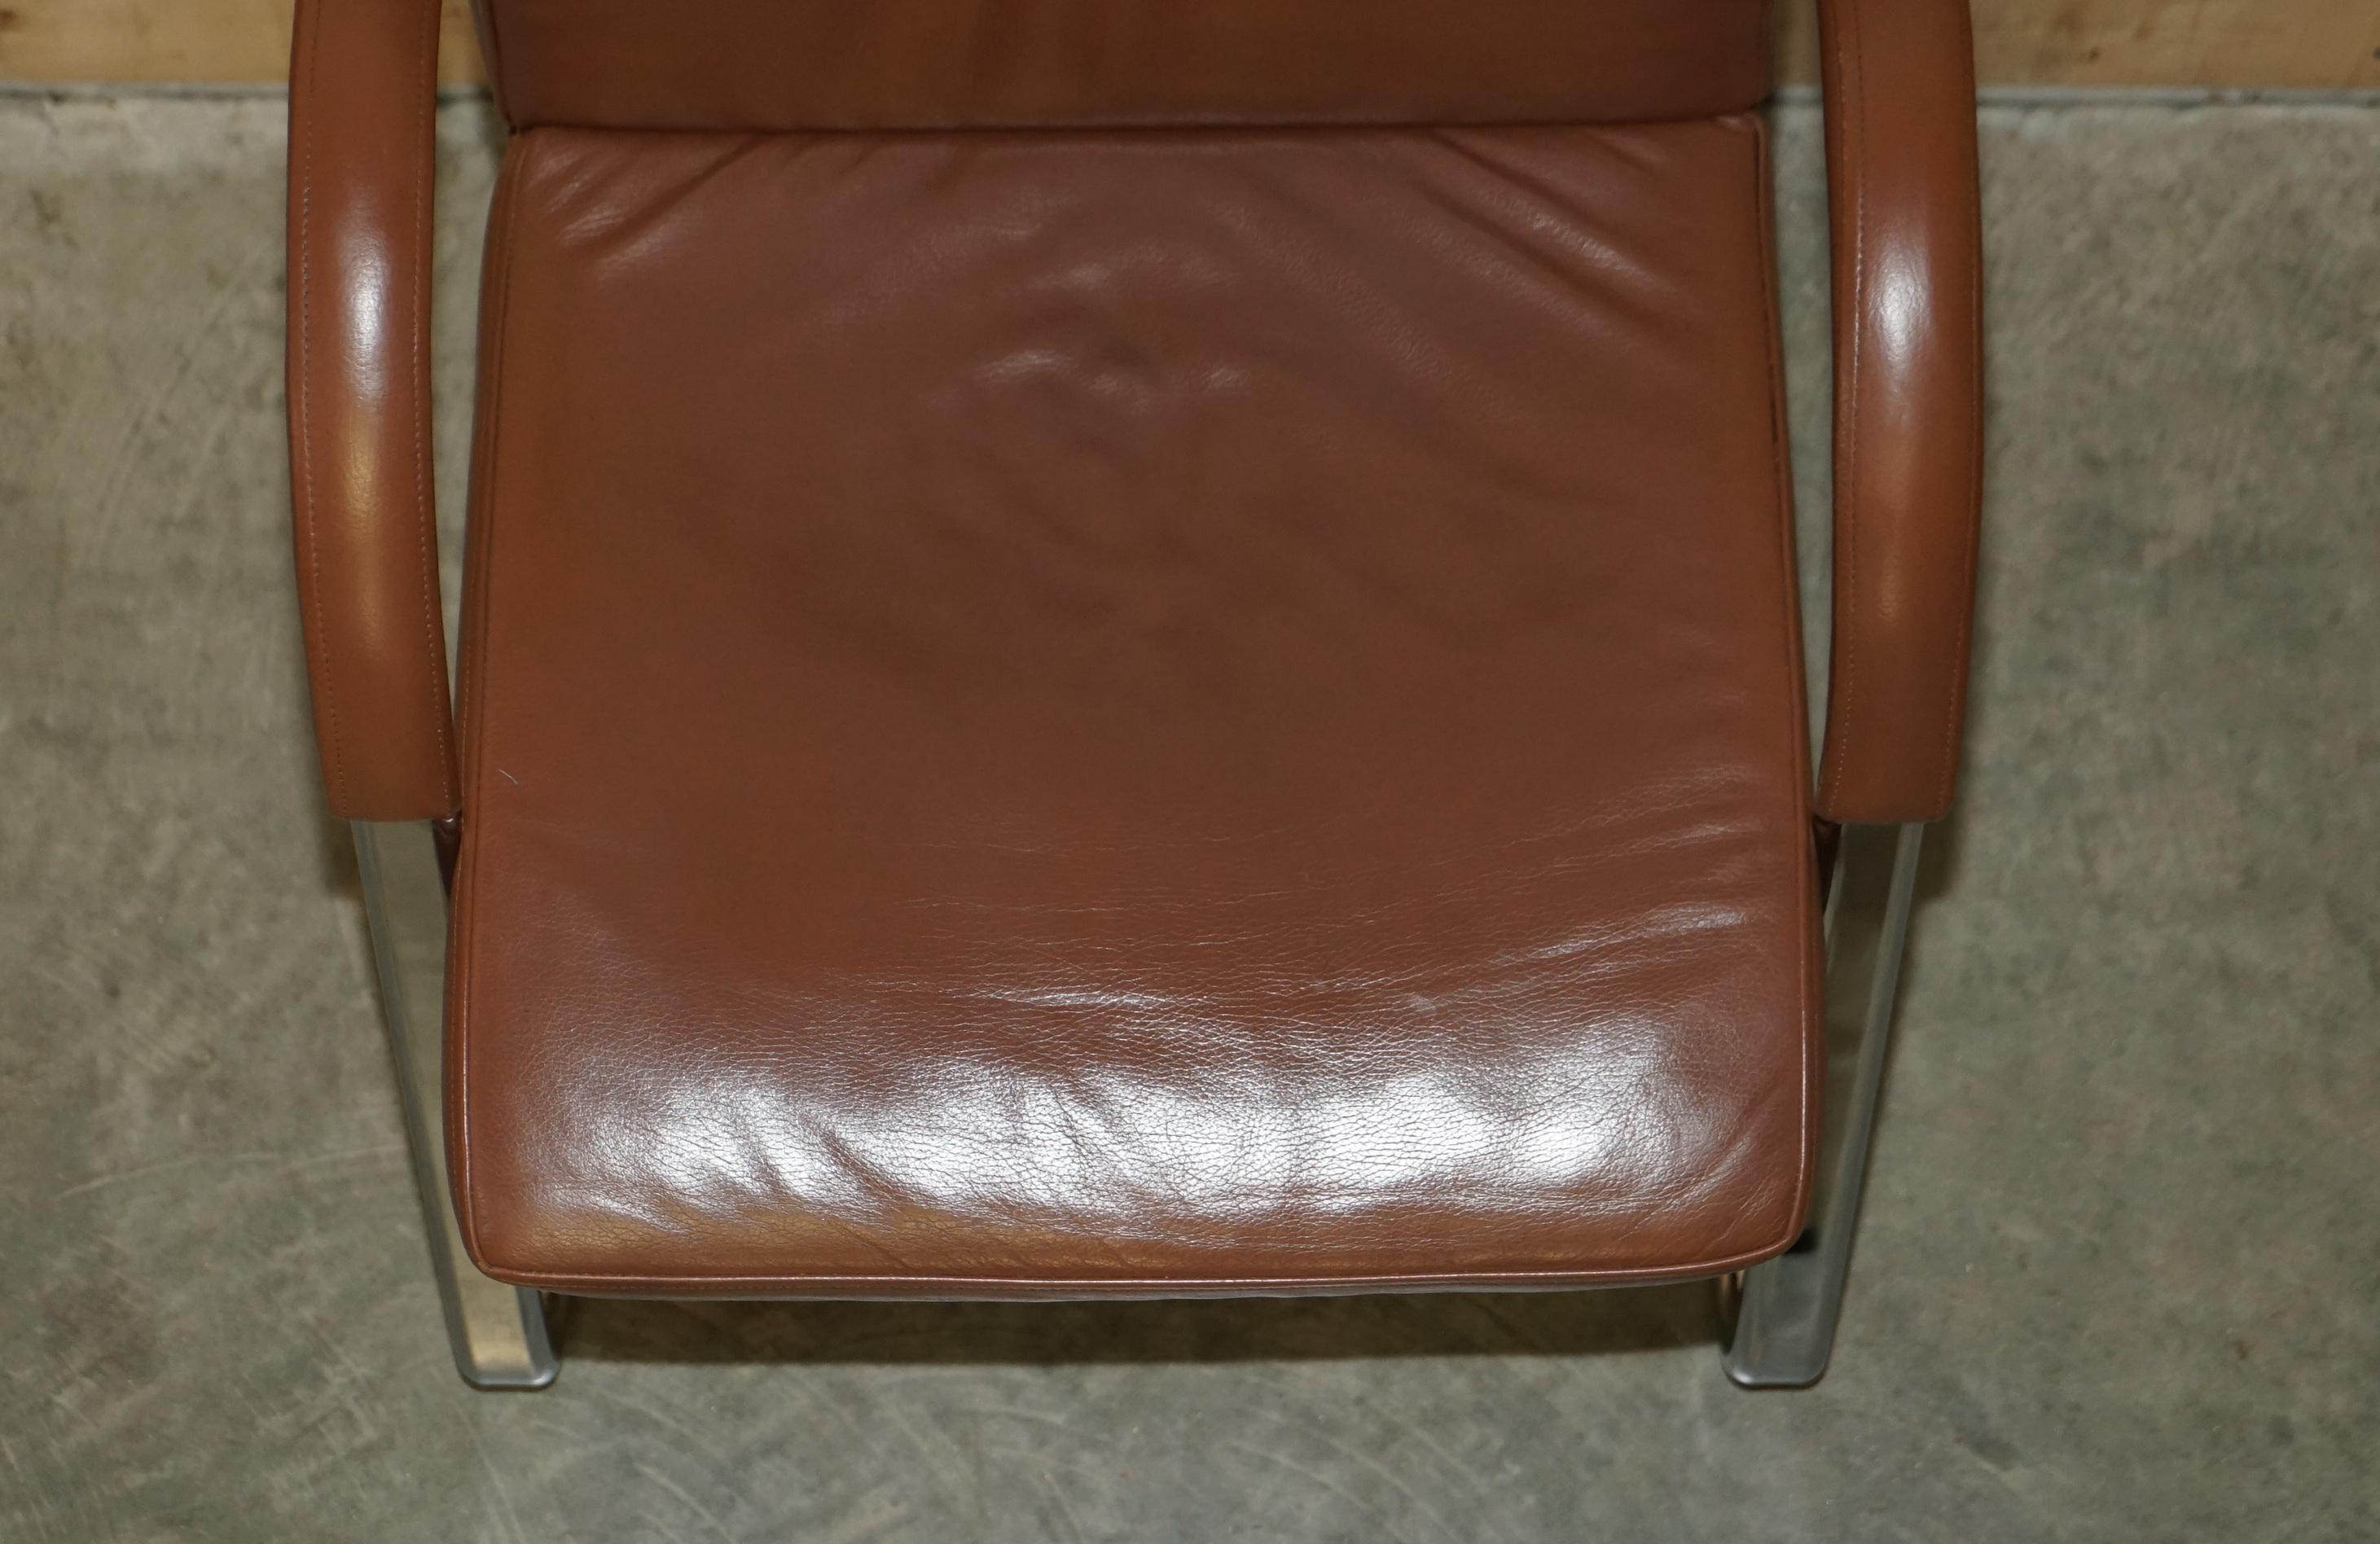 William Hands Orion Sofa Tan Brown Leather Office Captains Armchair For Sale 6